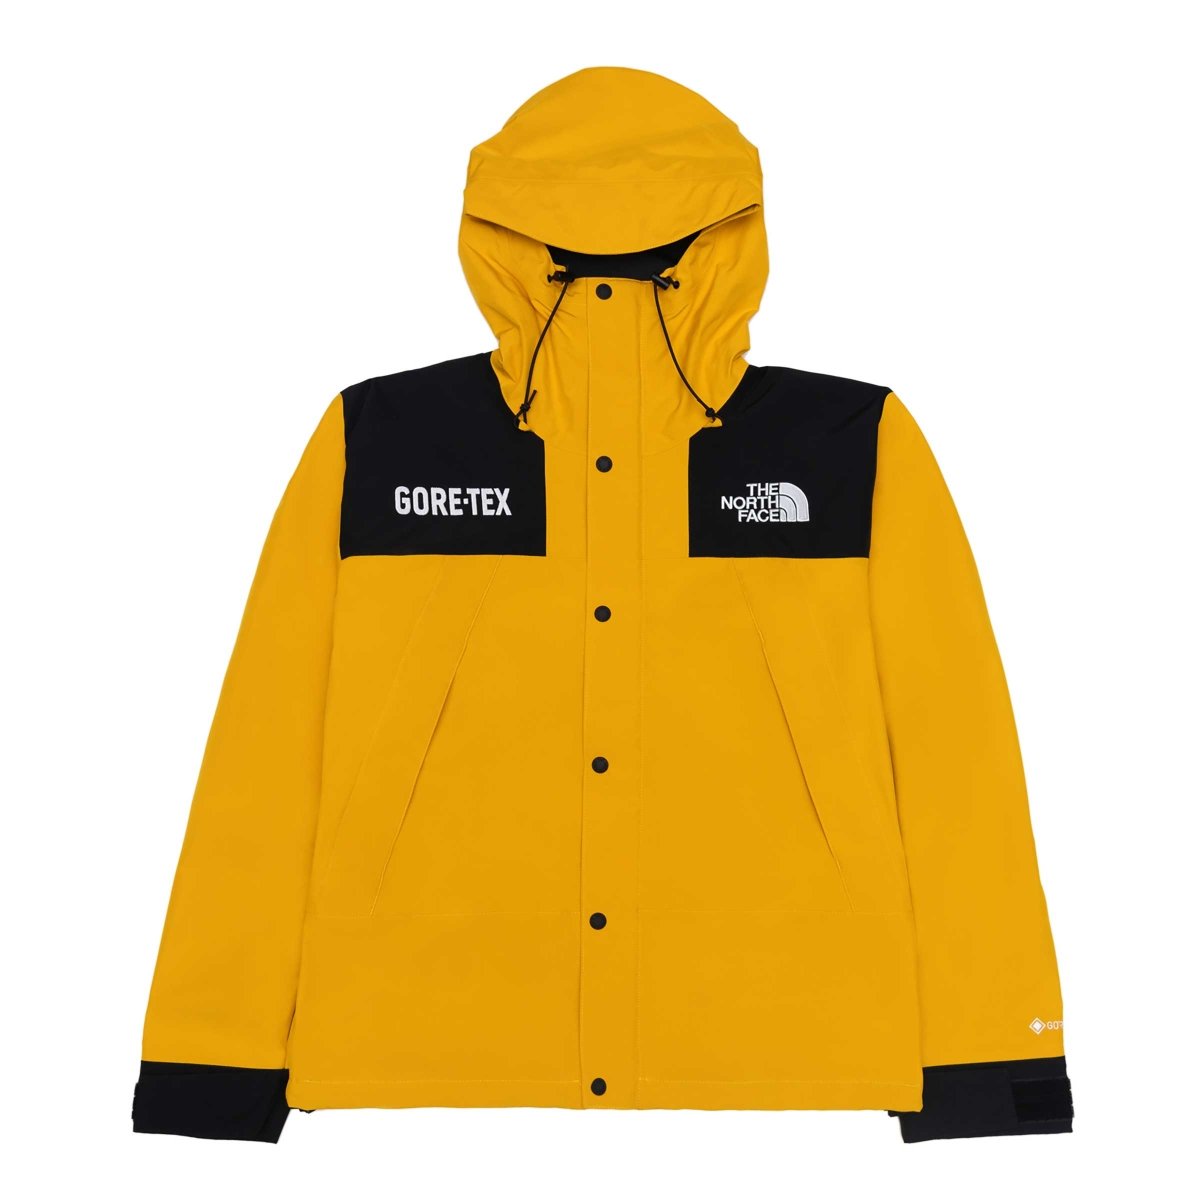 North Face Men's Mountain Jacket Gore-Tex Gold/Black - West NYC